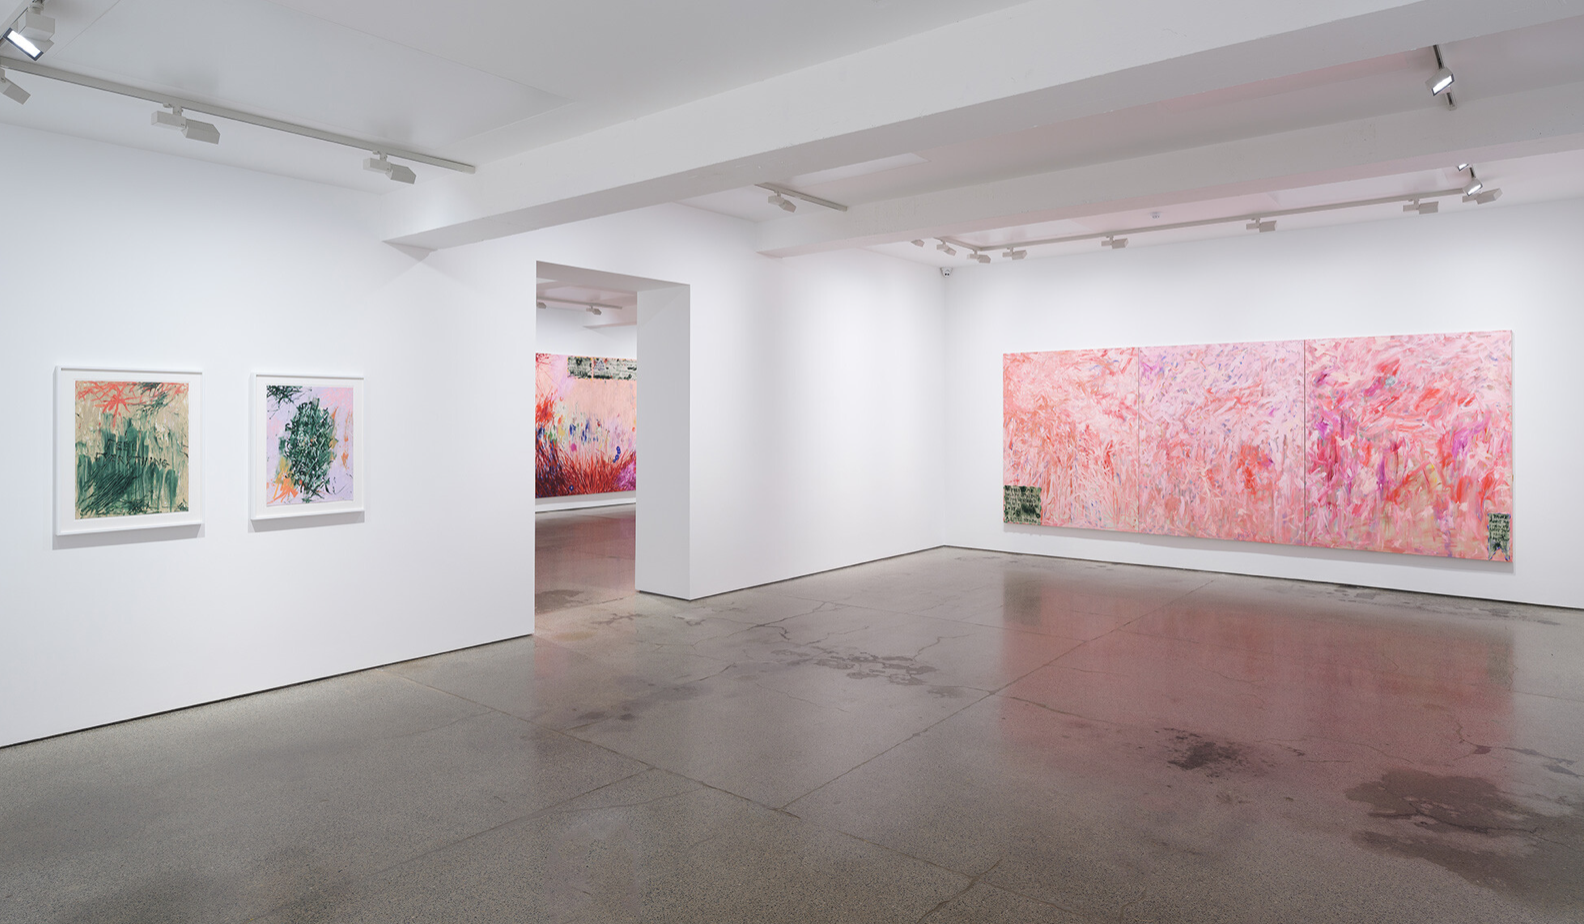 “Mother Me” Daisy Parris’ solo show at Carl Freedman